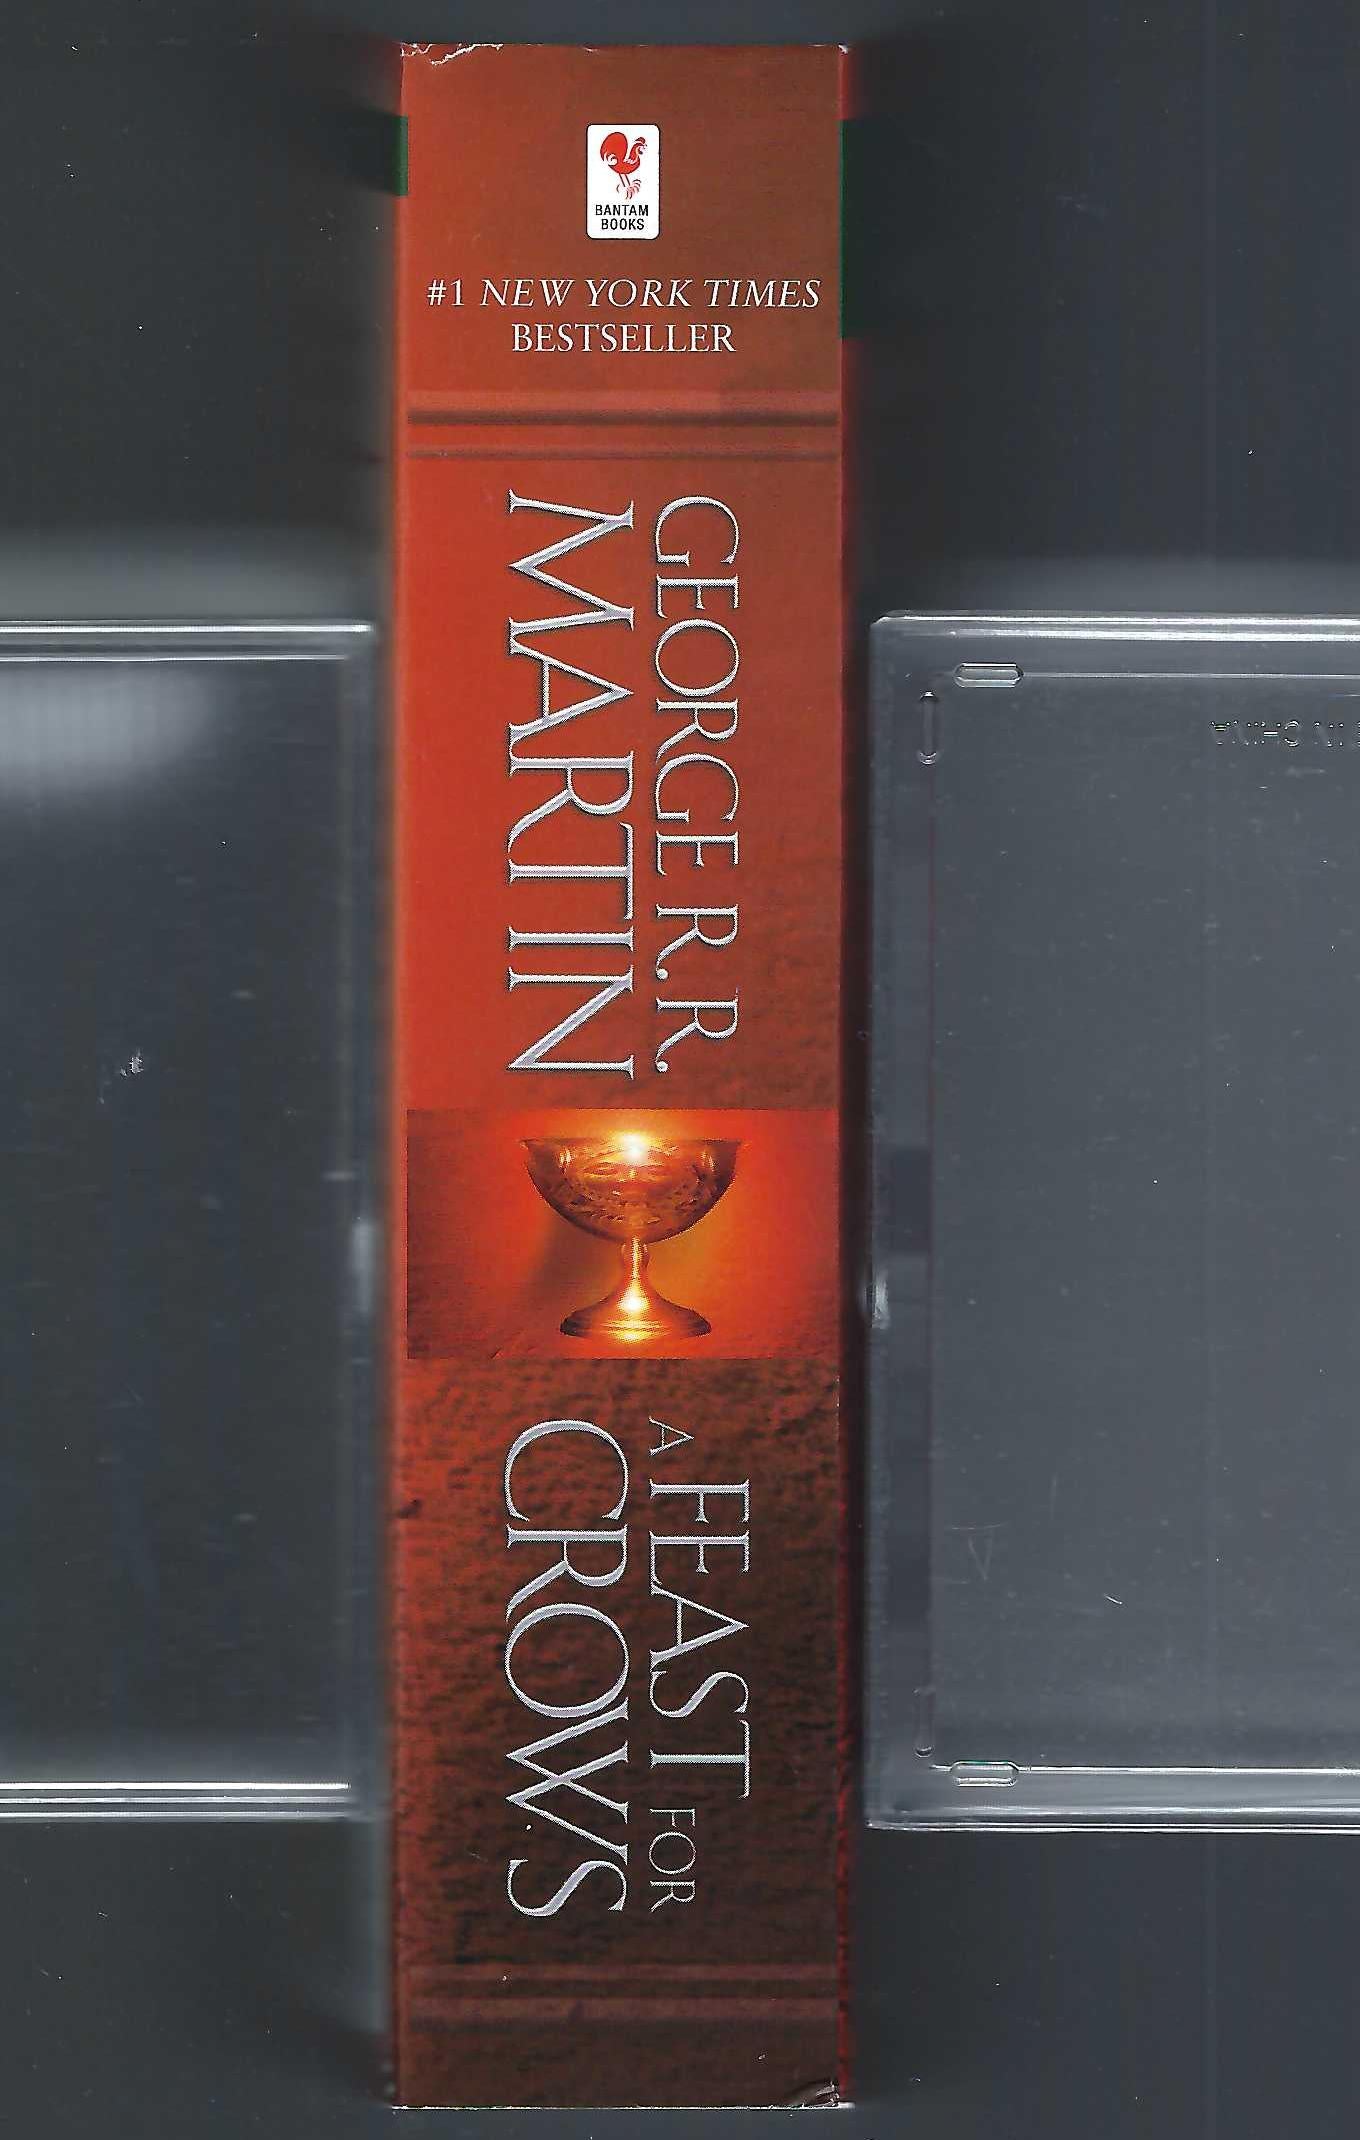 Feast for Crows (A Song of Ice and Fire #4) by George R. R. Martin